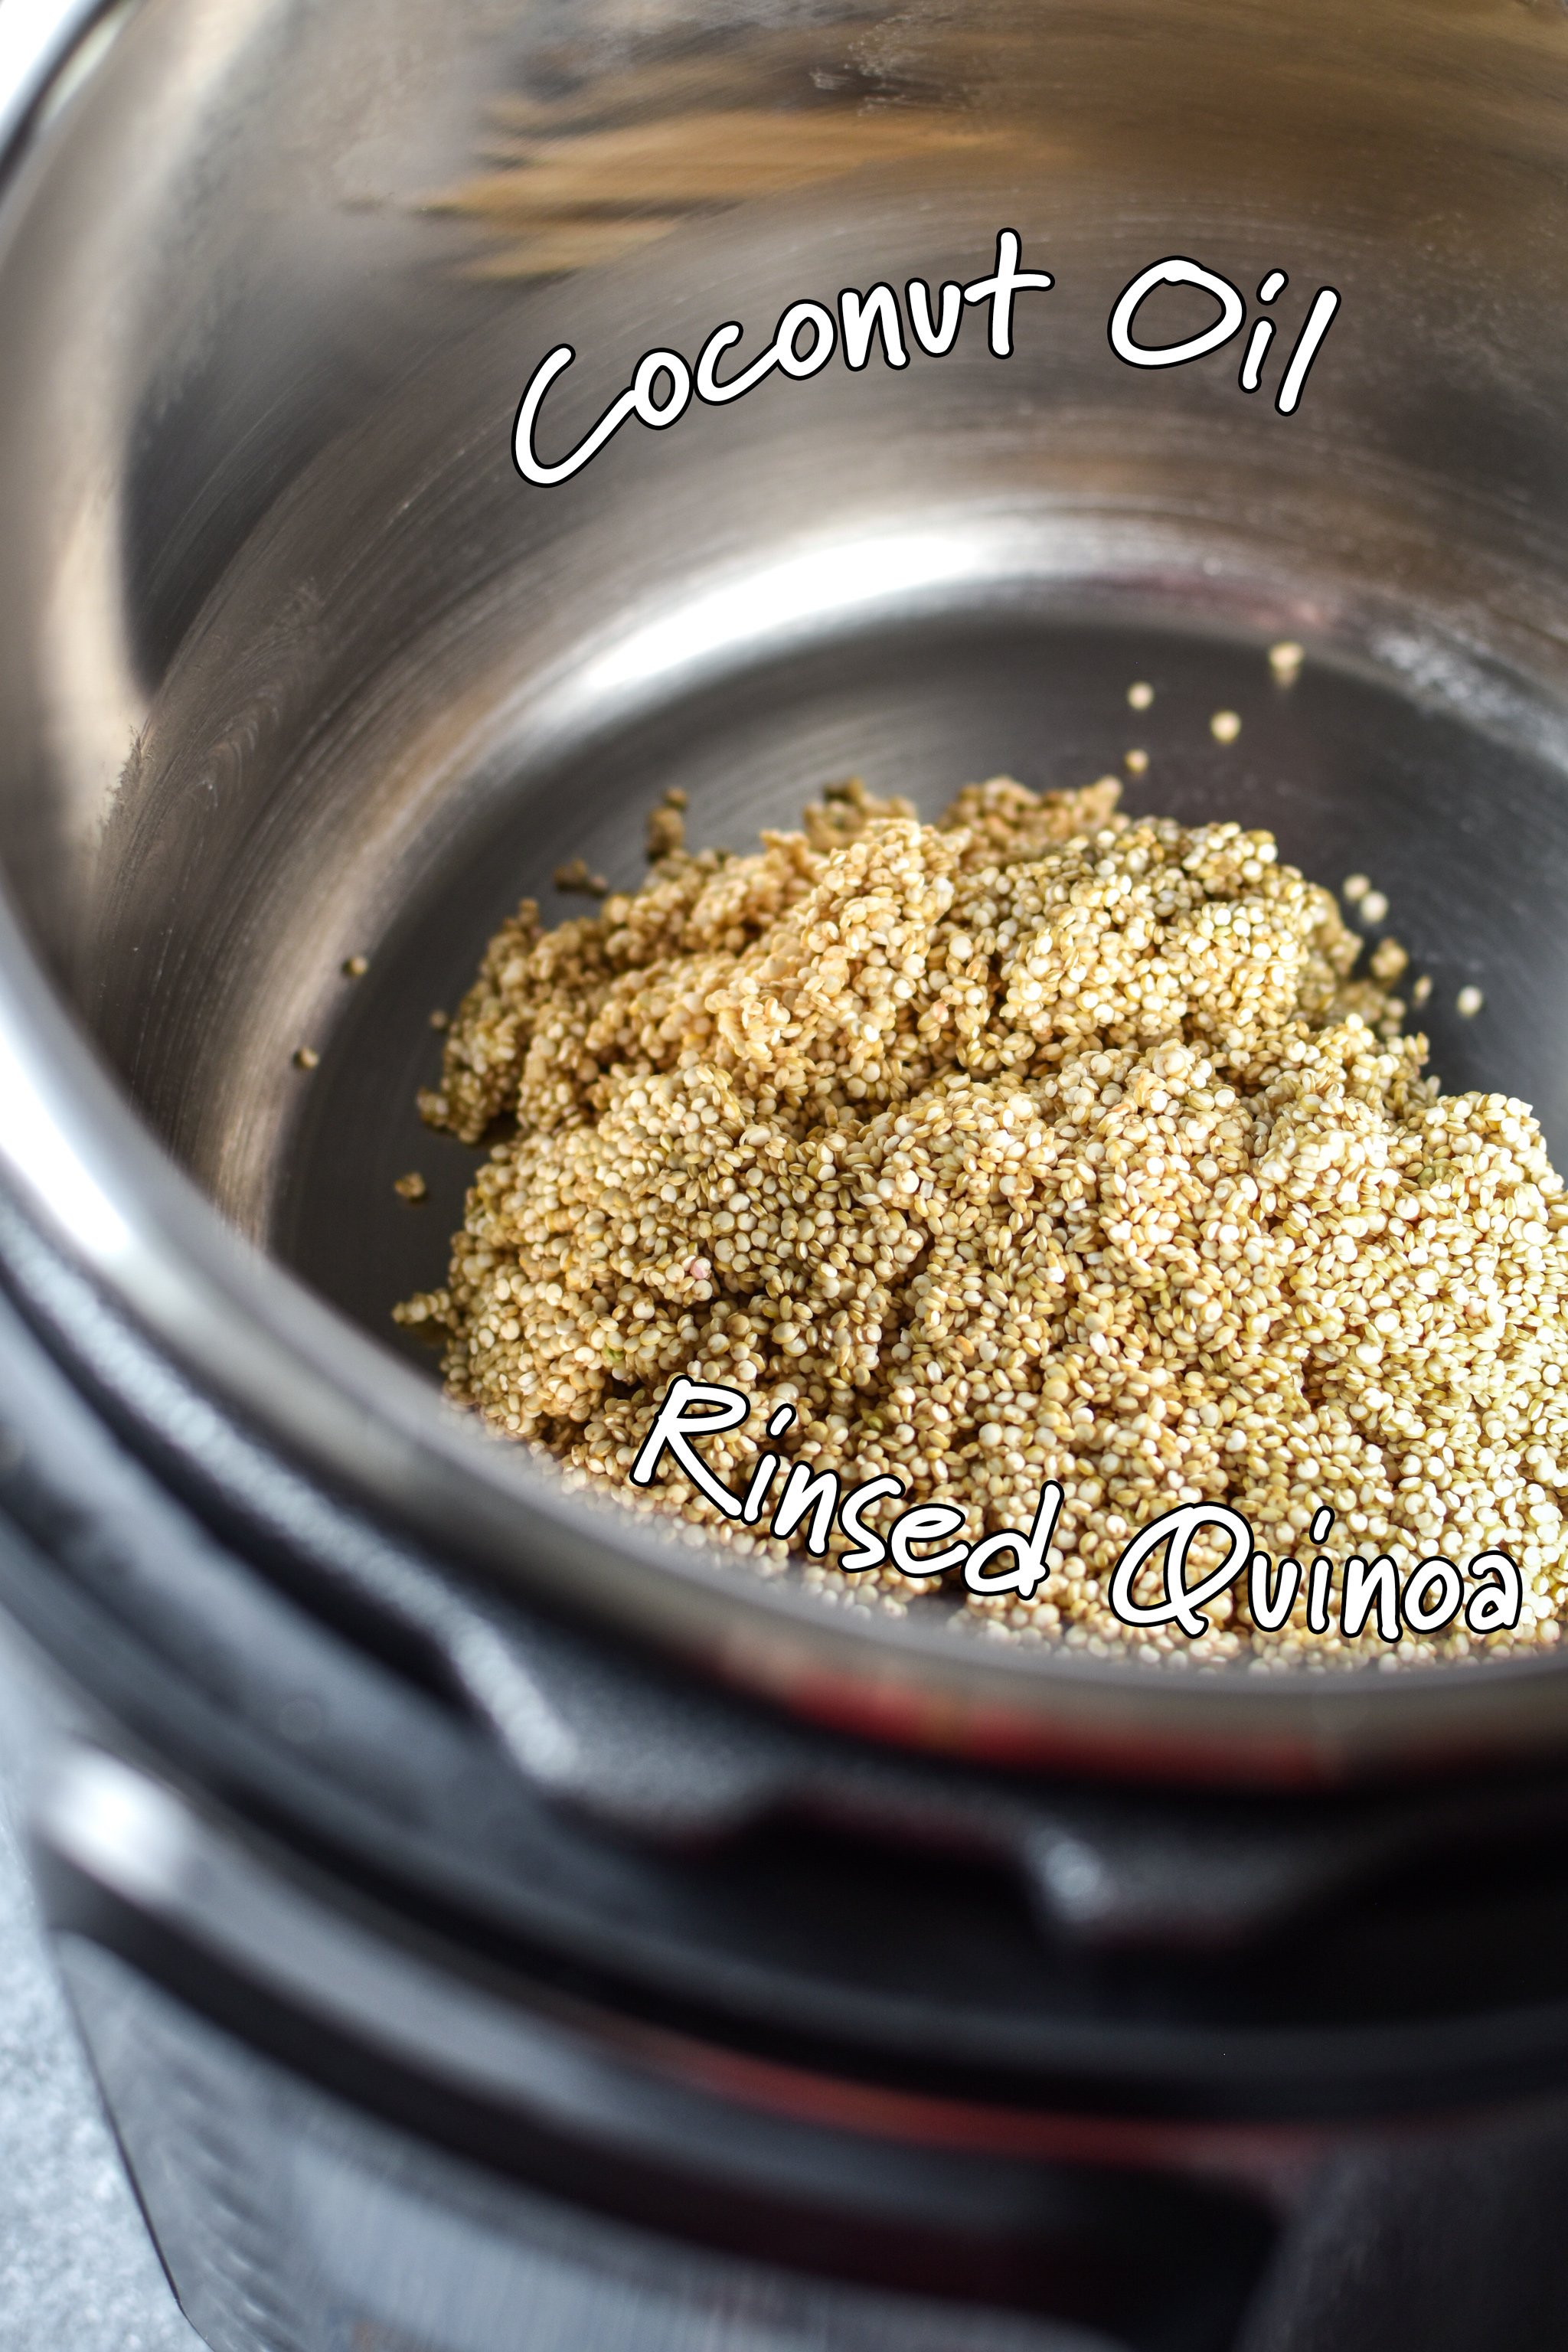 Uncooked quinoa placed into the Instant Pot with labels for coconut oil and rinsed quinoa.